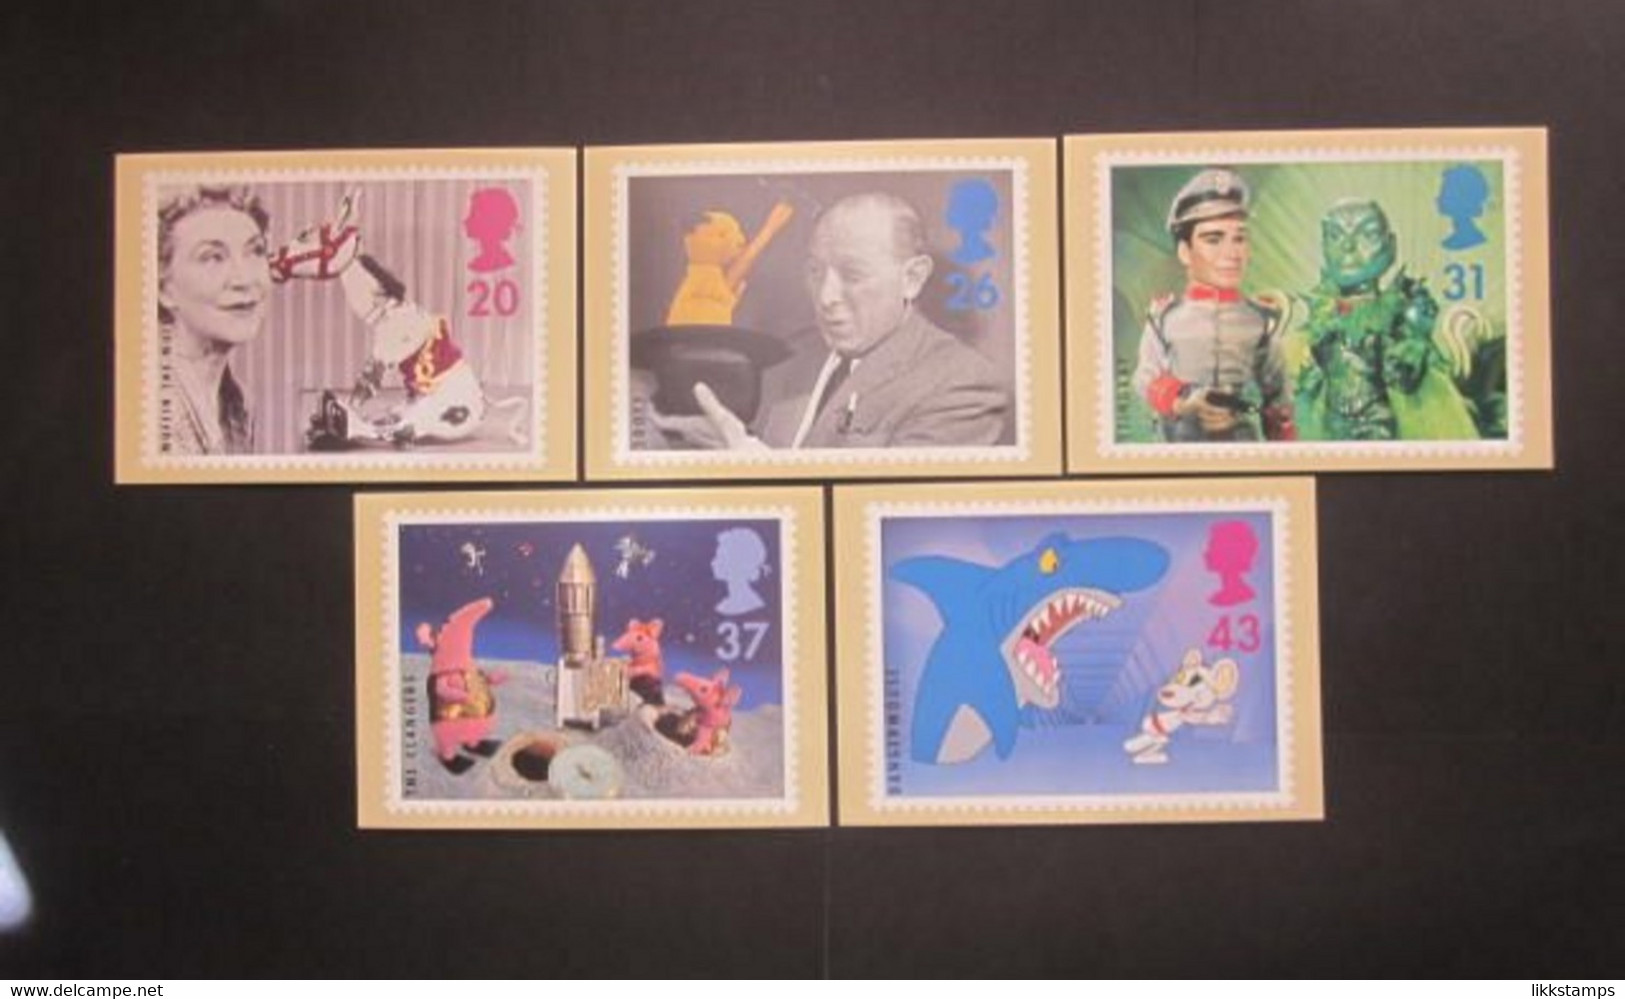 1996 THE 50th ANNIVERSARY OF CHILDREN'S TELEVISION P.H.Q. CARDS UNUSED, ISSUE No. 182 (B) #01027 - Carte PHQ